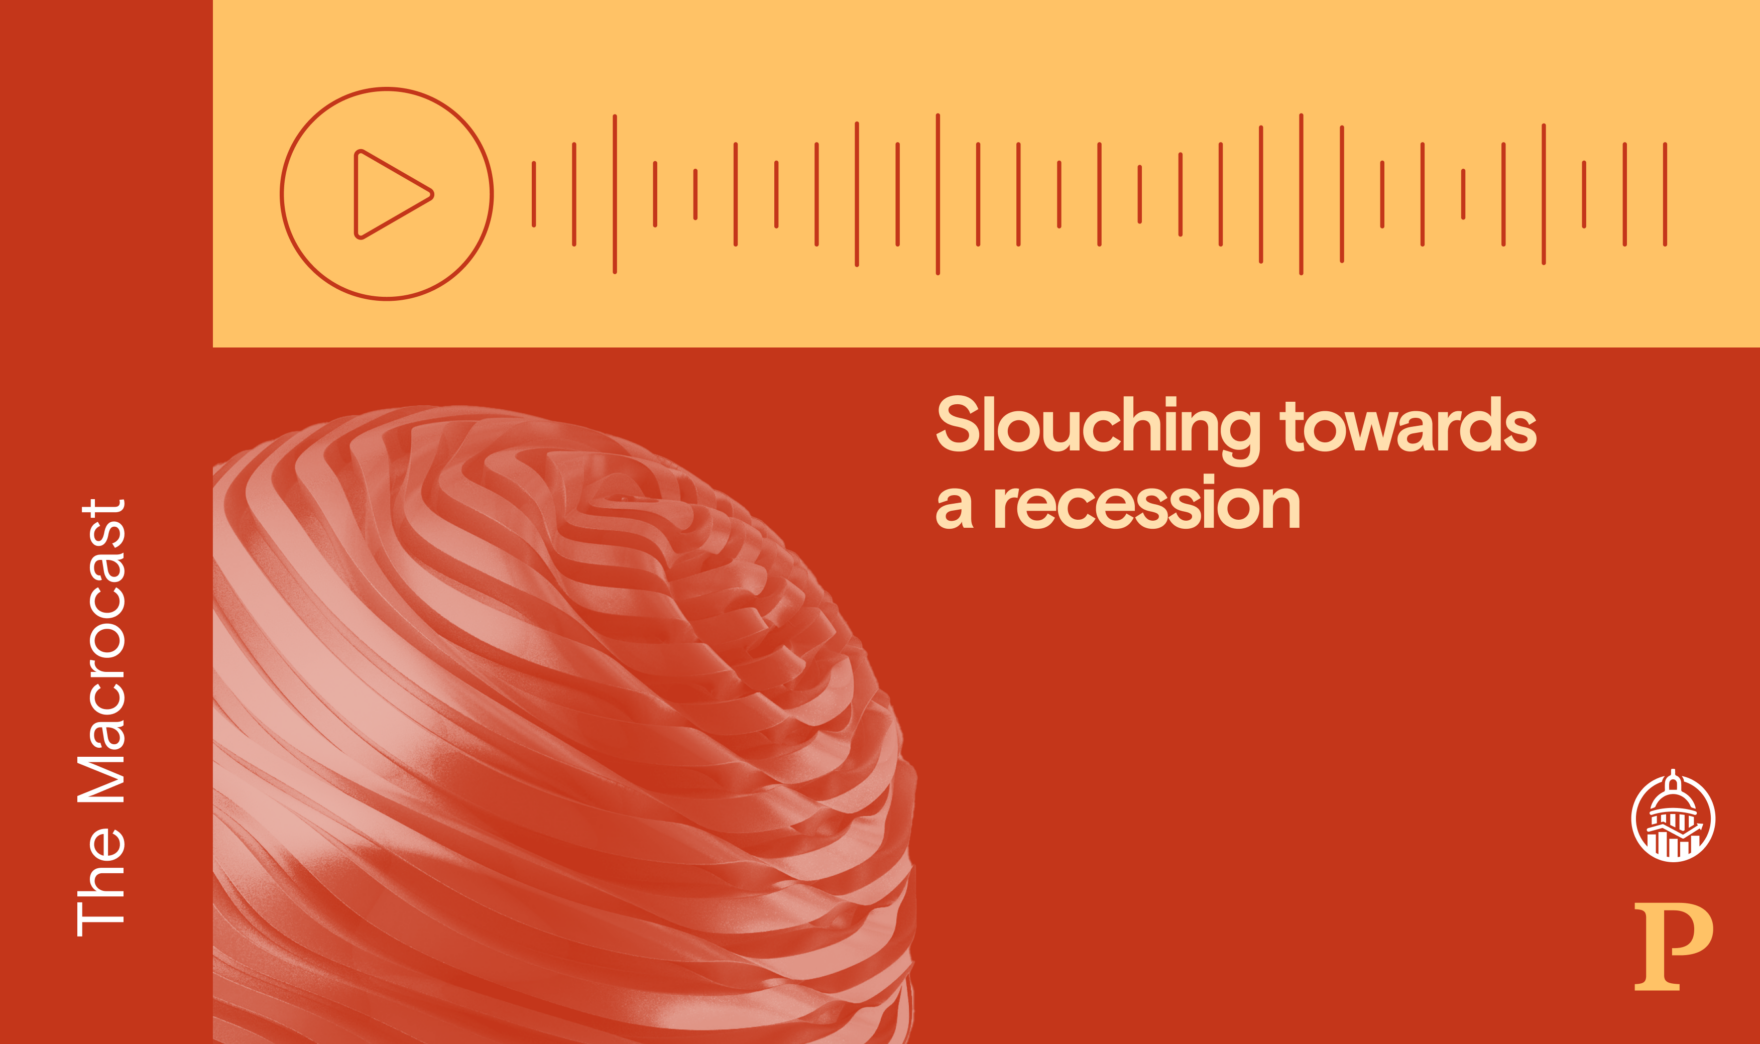 Macrocast: Slouching towards a recession